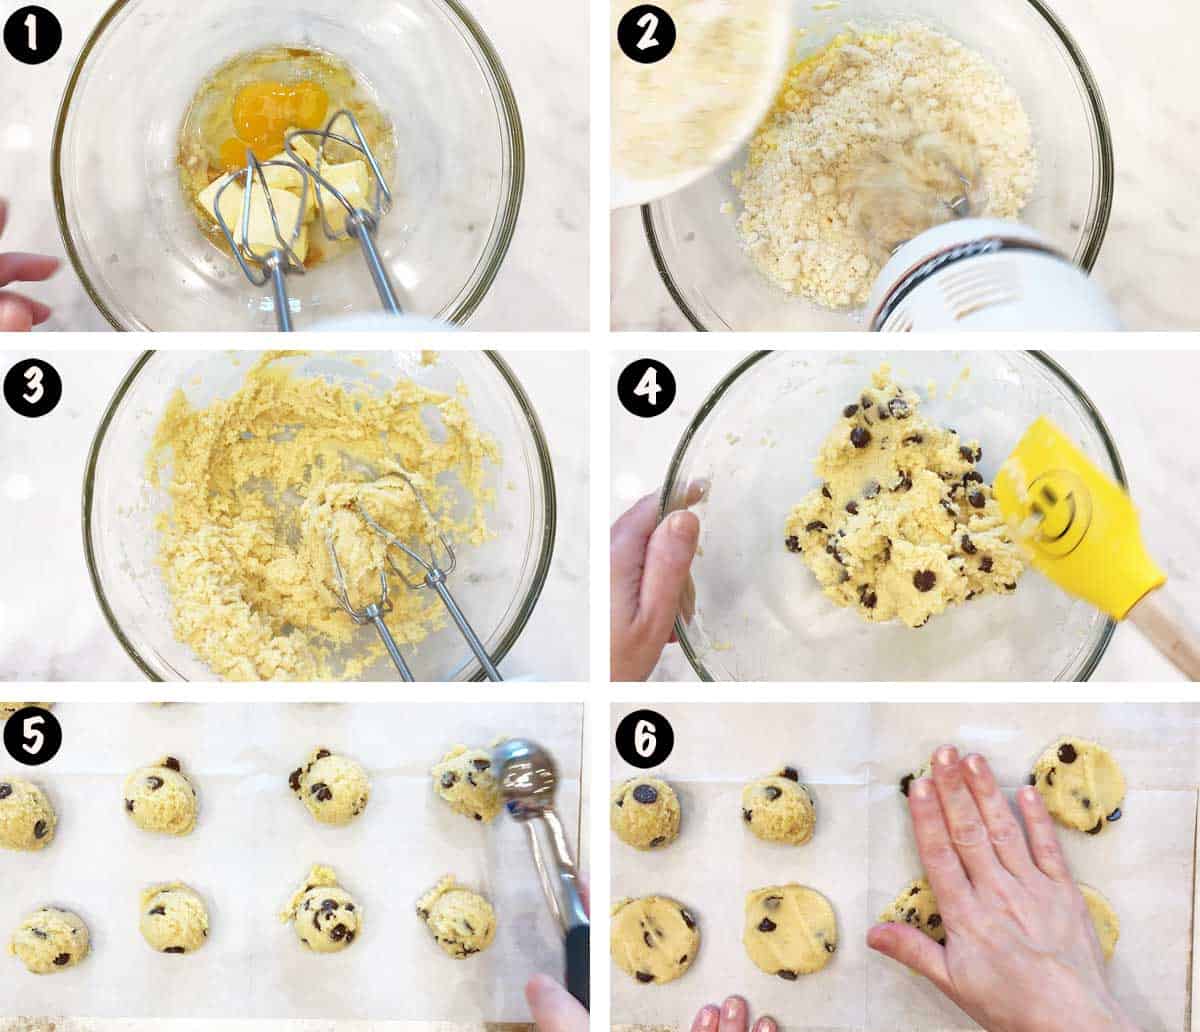 A six-photo collage showing the steps for baking low-carb chocolate chip cookies. 